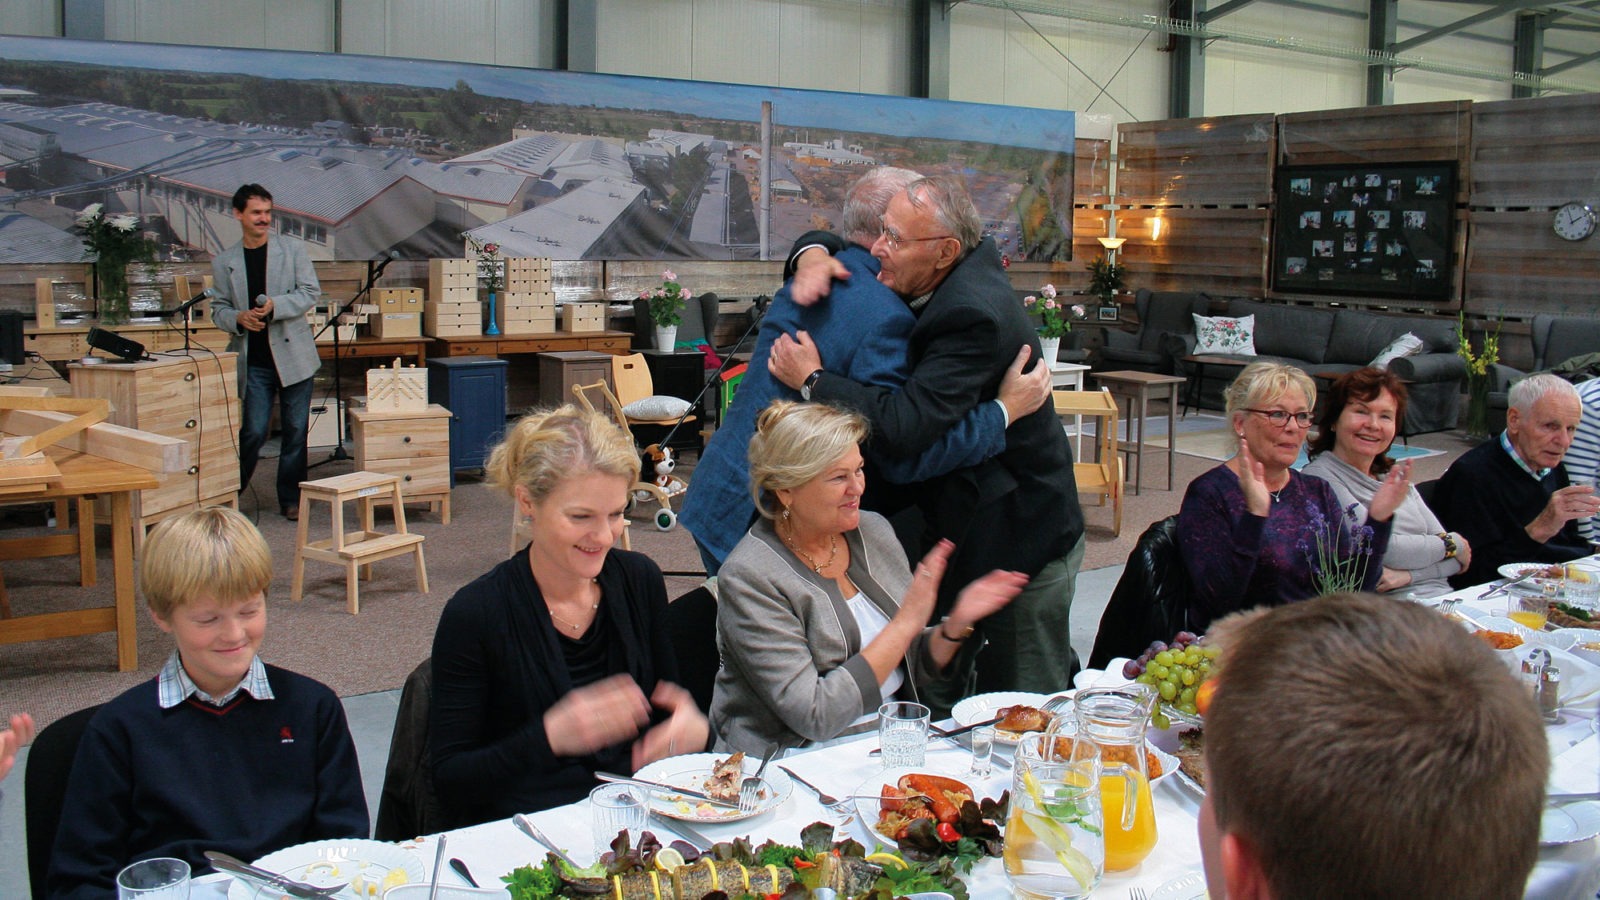 Group of happy people at festive table in factory showroom. Ingvar Kamprad stands and hugs Roman Prawda, both are in suits.